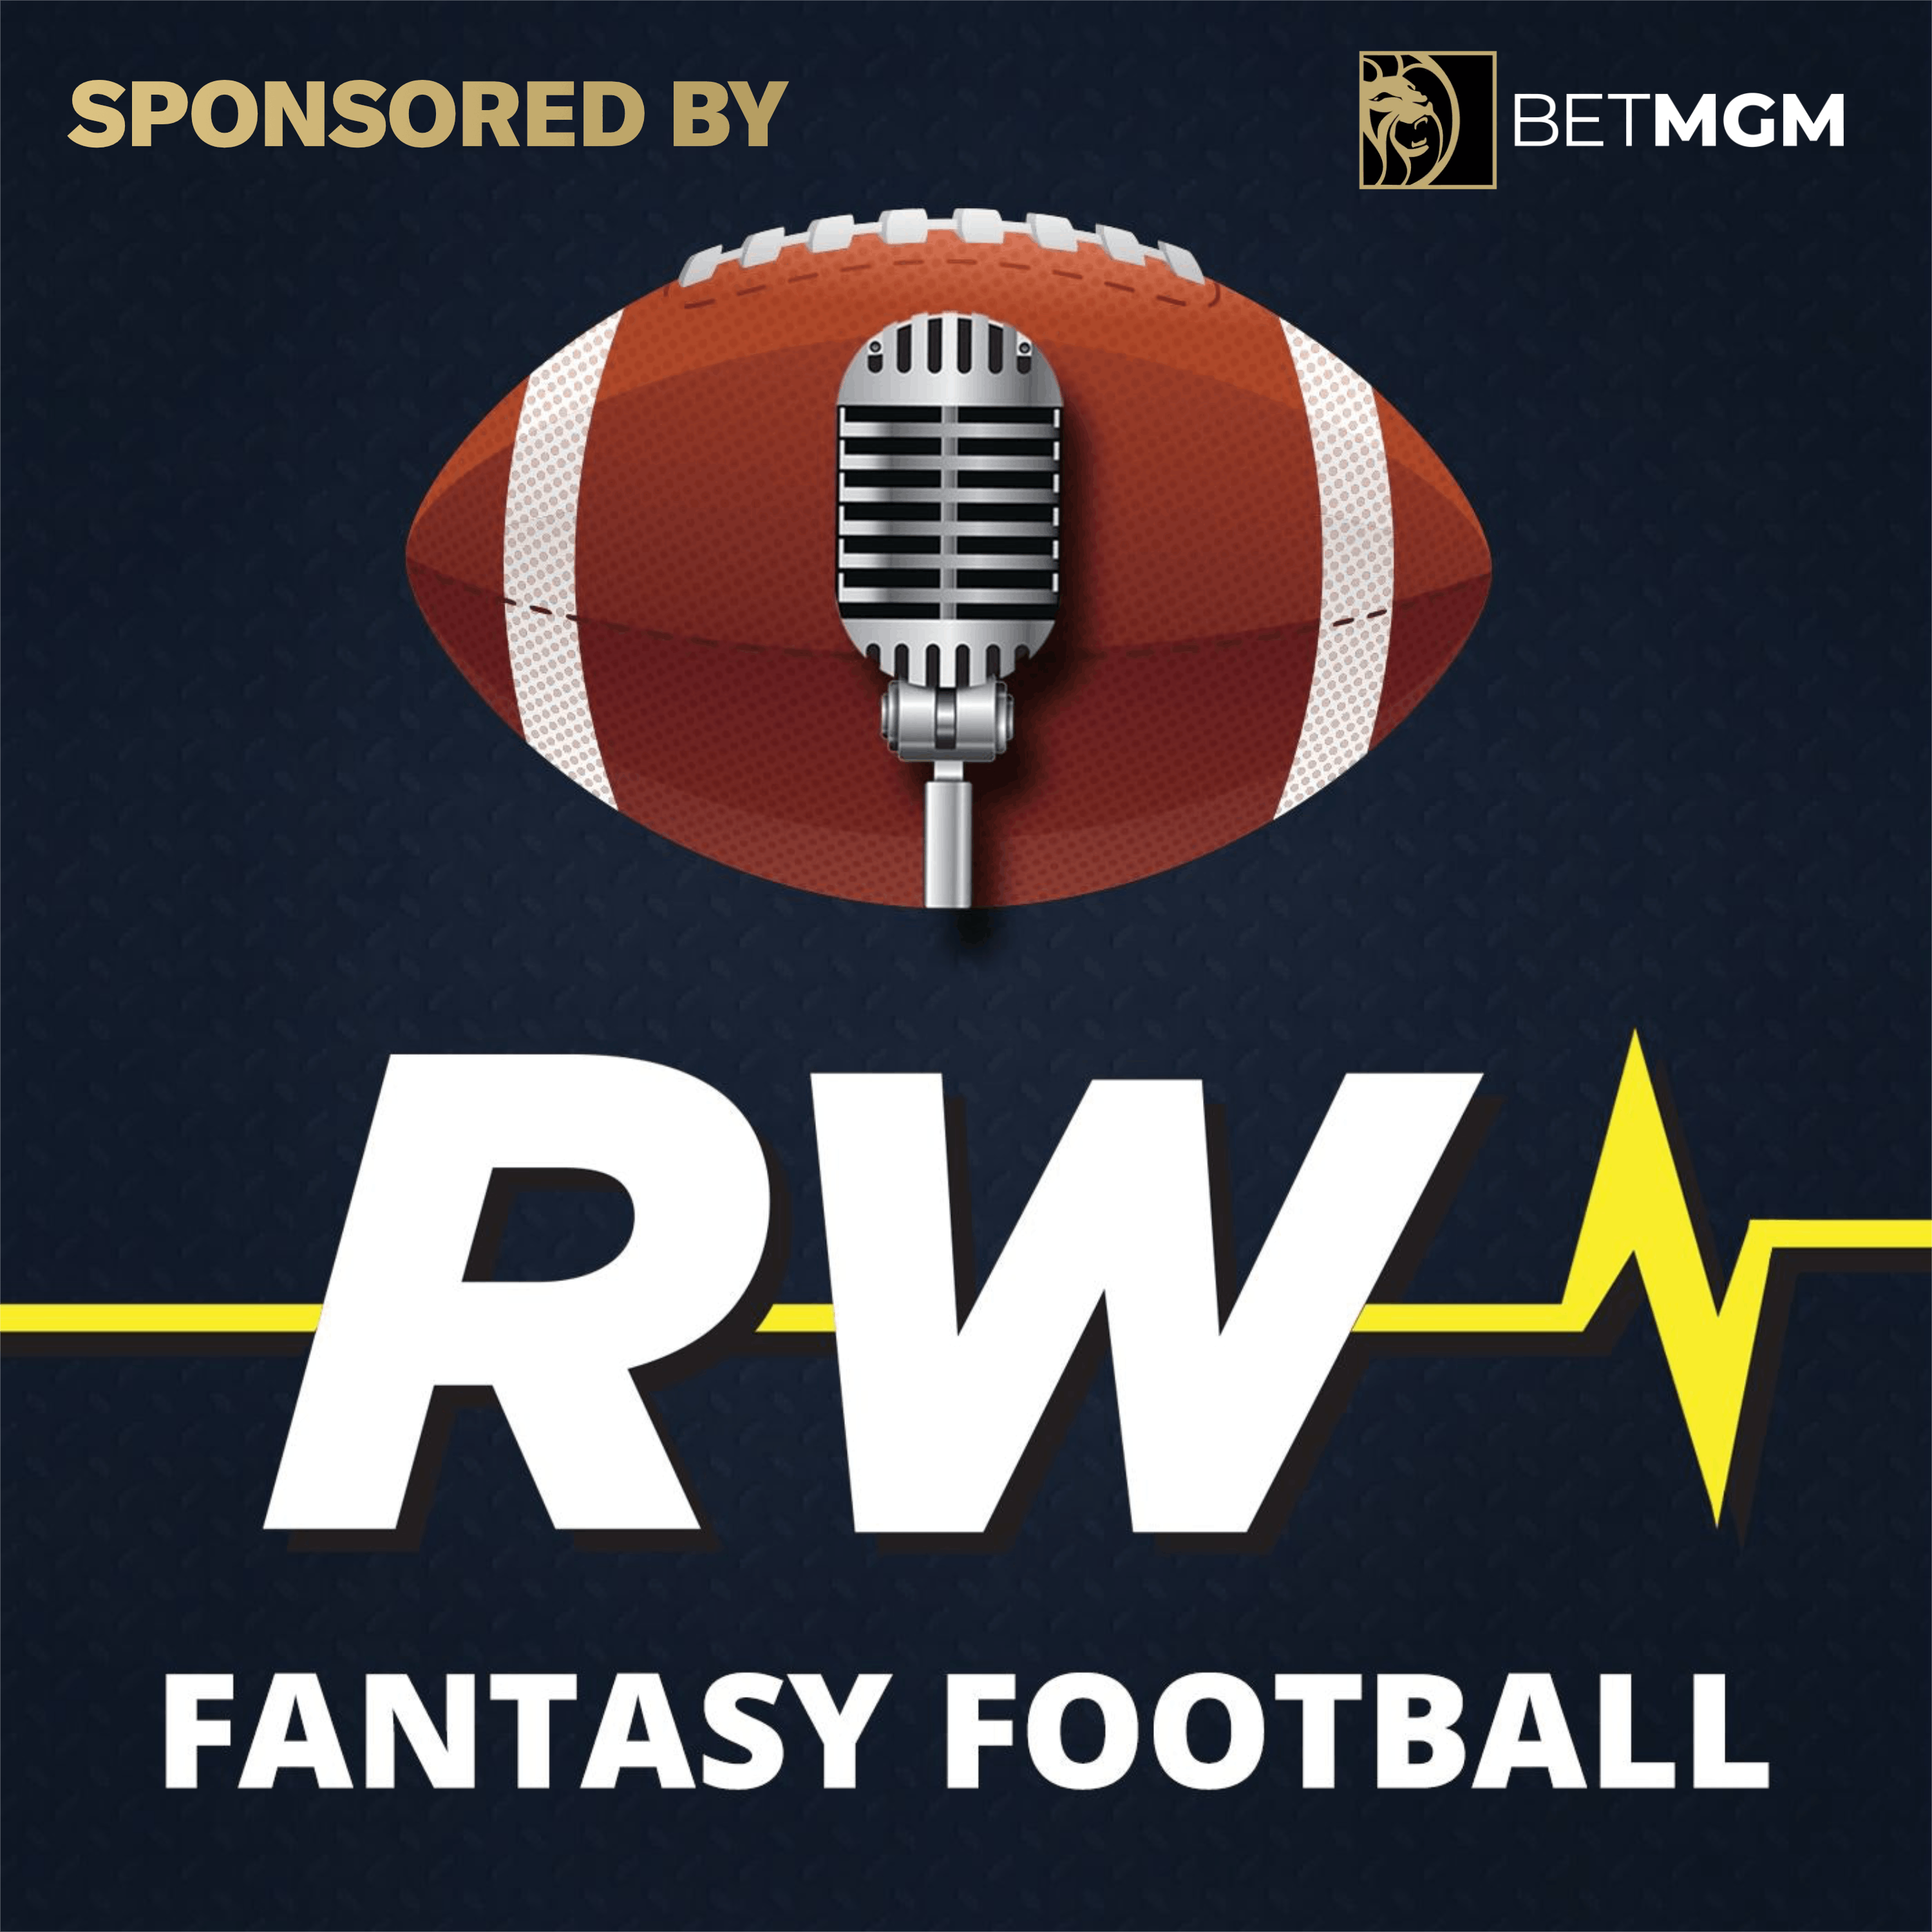 RotoWire vs. Bookies.com Ultimate Super Bowl Betting Battle Royale, Presented by BetMGM